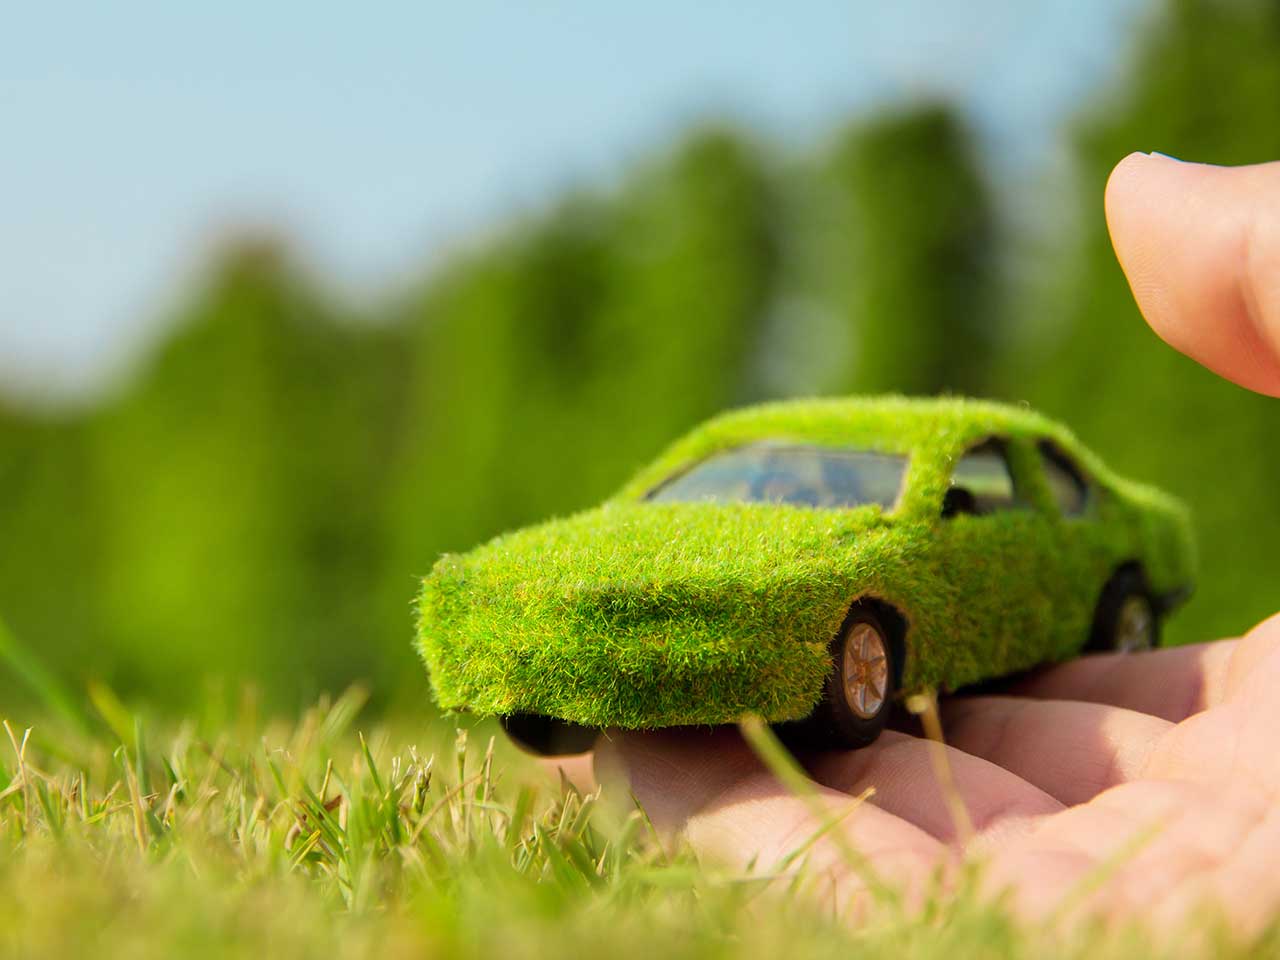 Car covered in grass to show environemntally friendly motoring